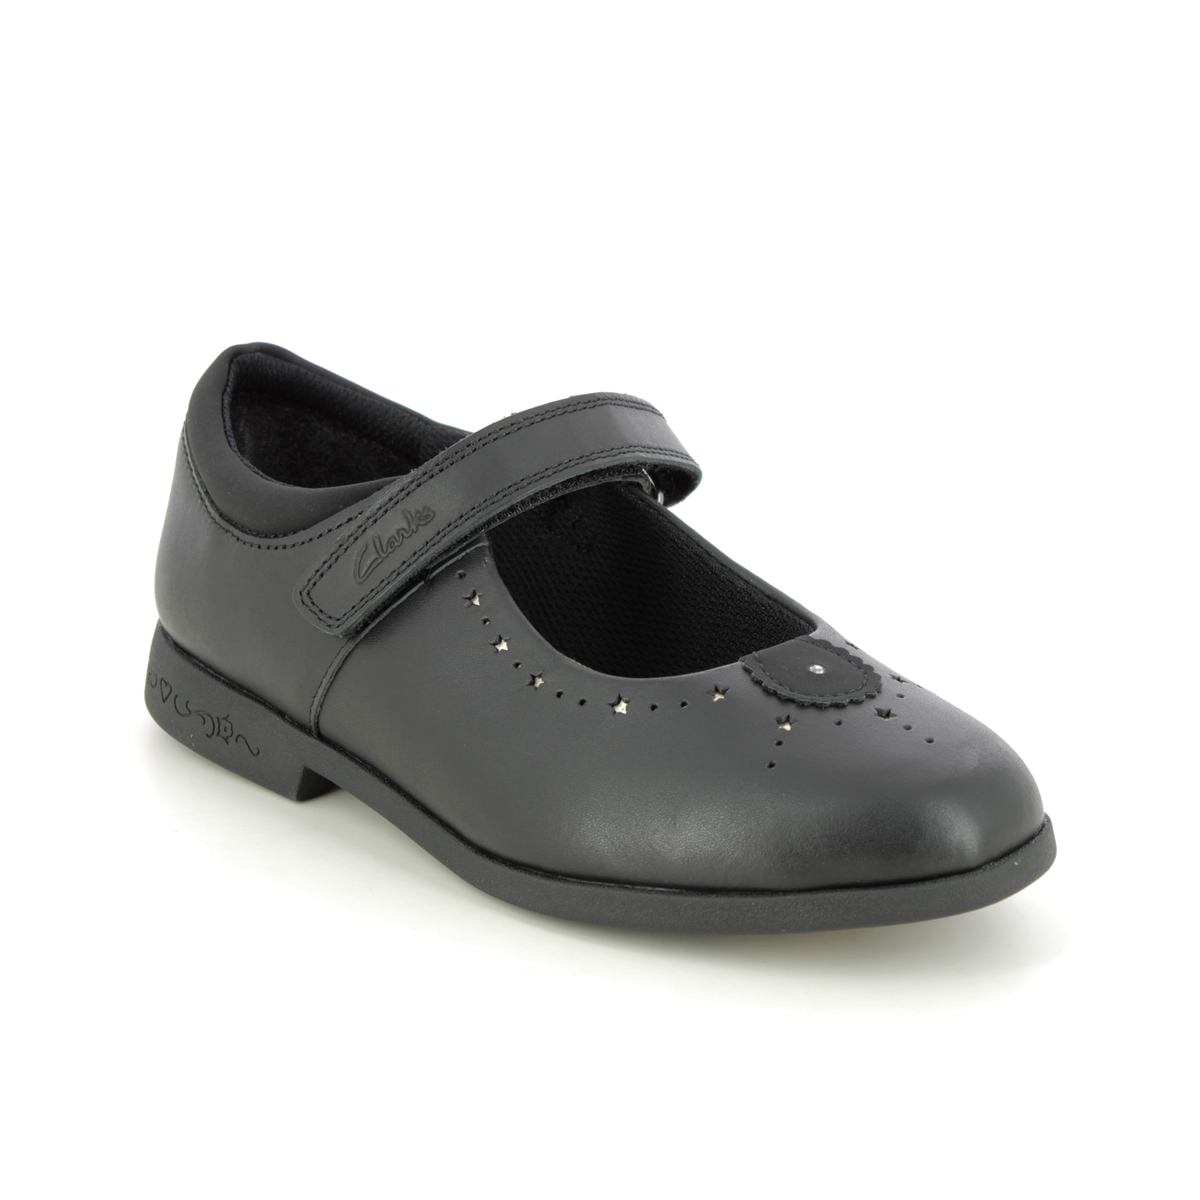 Clarks Magic Step Mj O Black Leather Kids Girls School Shoes 697057G In Size 3.5 In Plain Black Leather G Width Fitting For School For kids